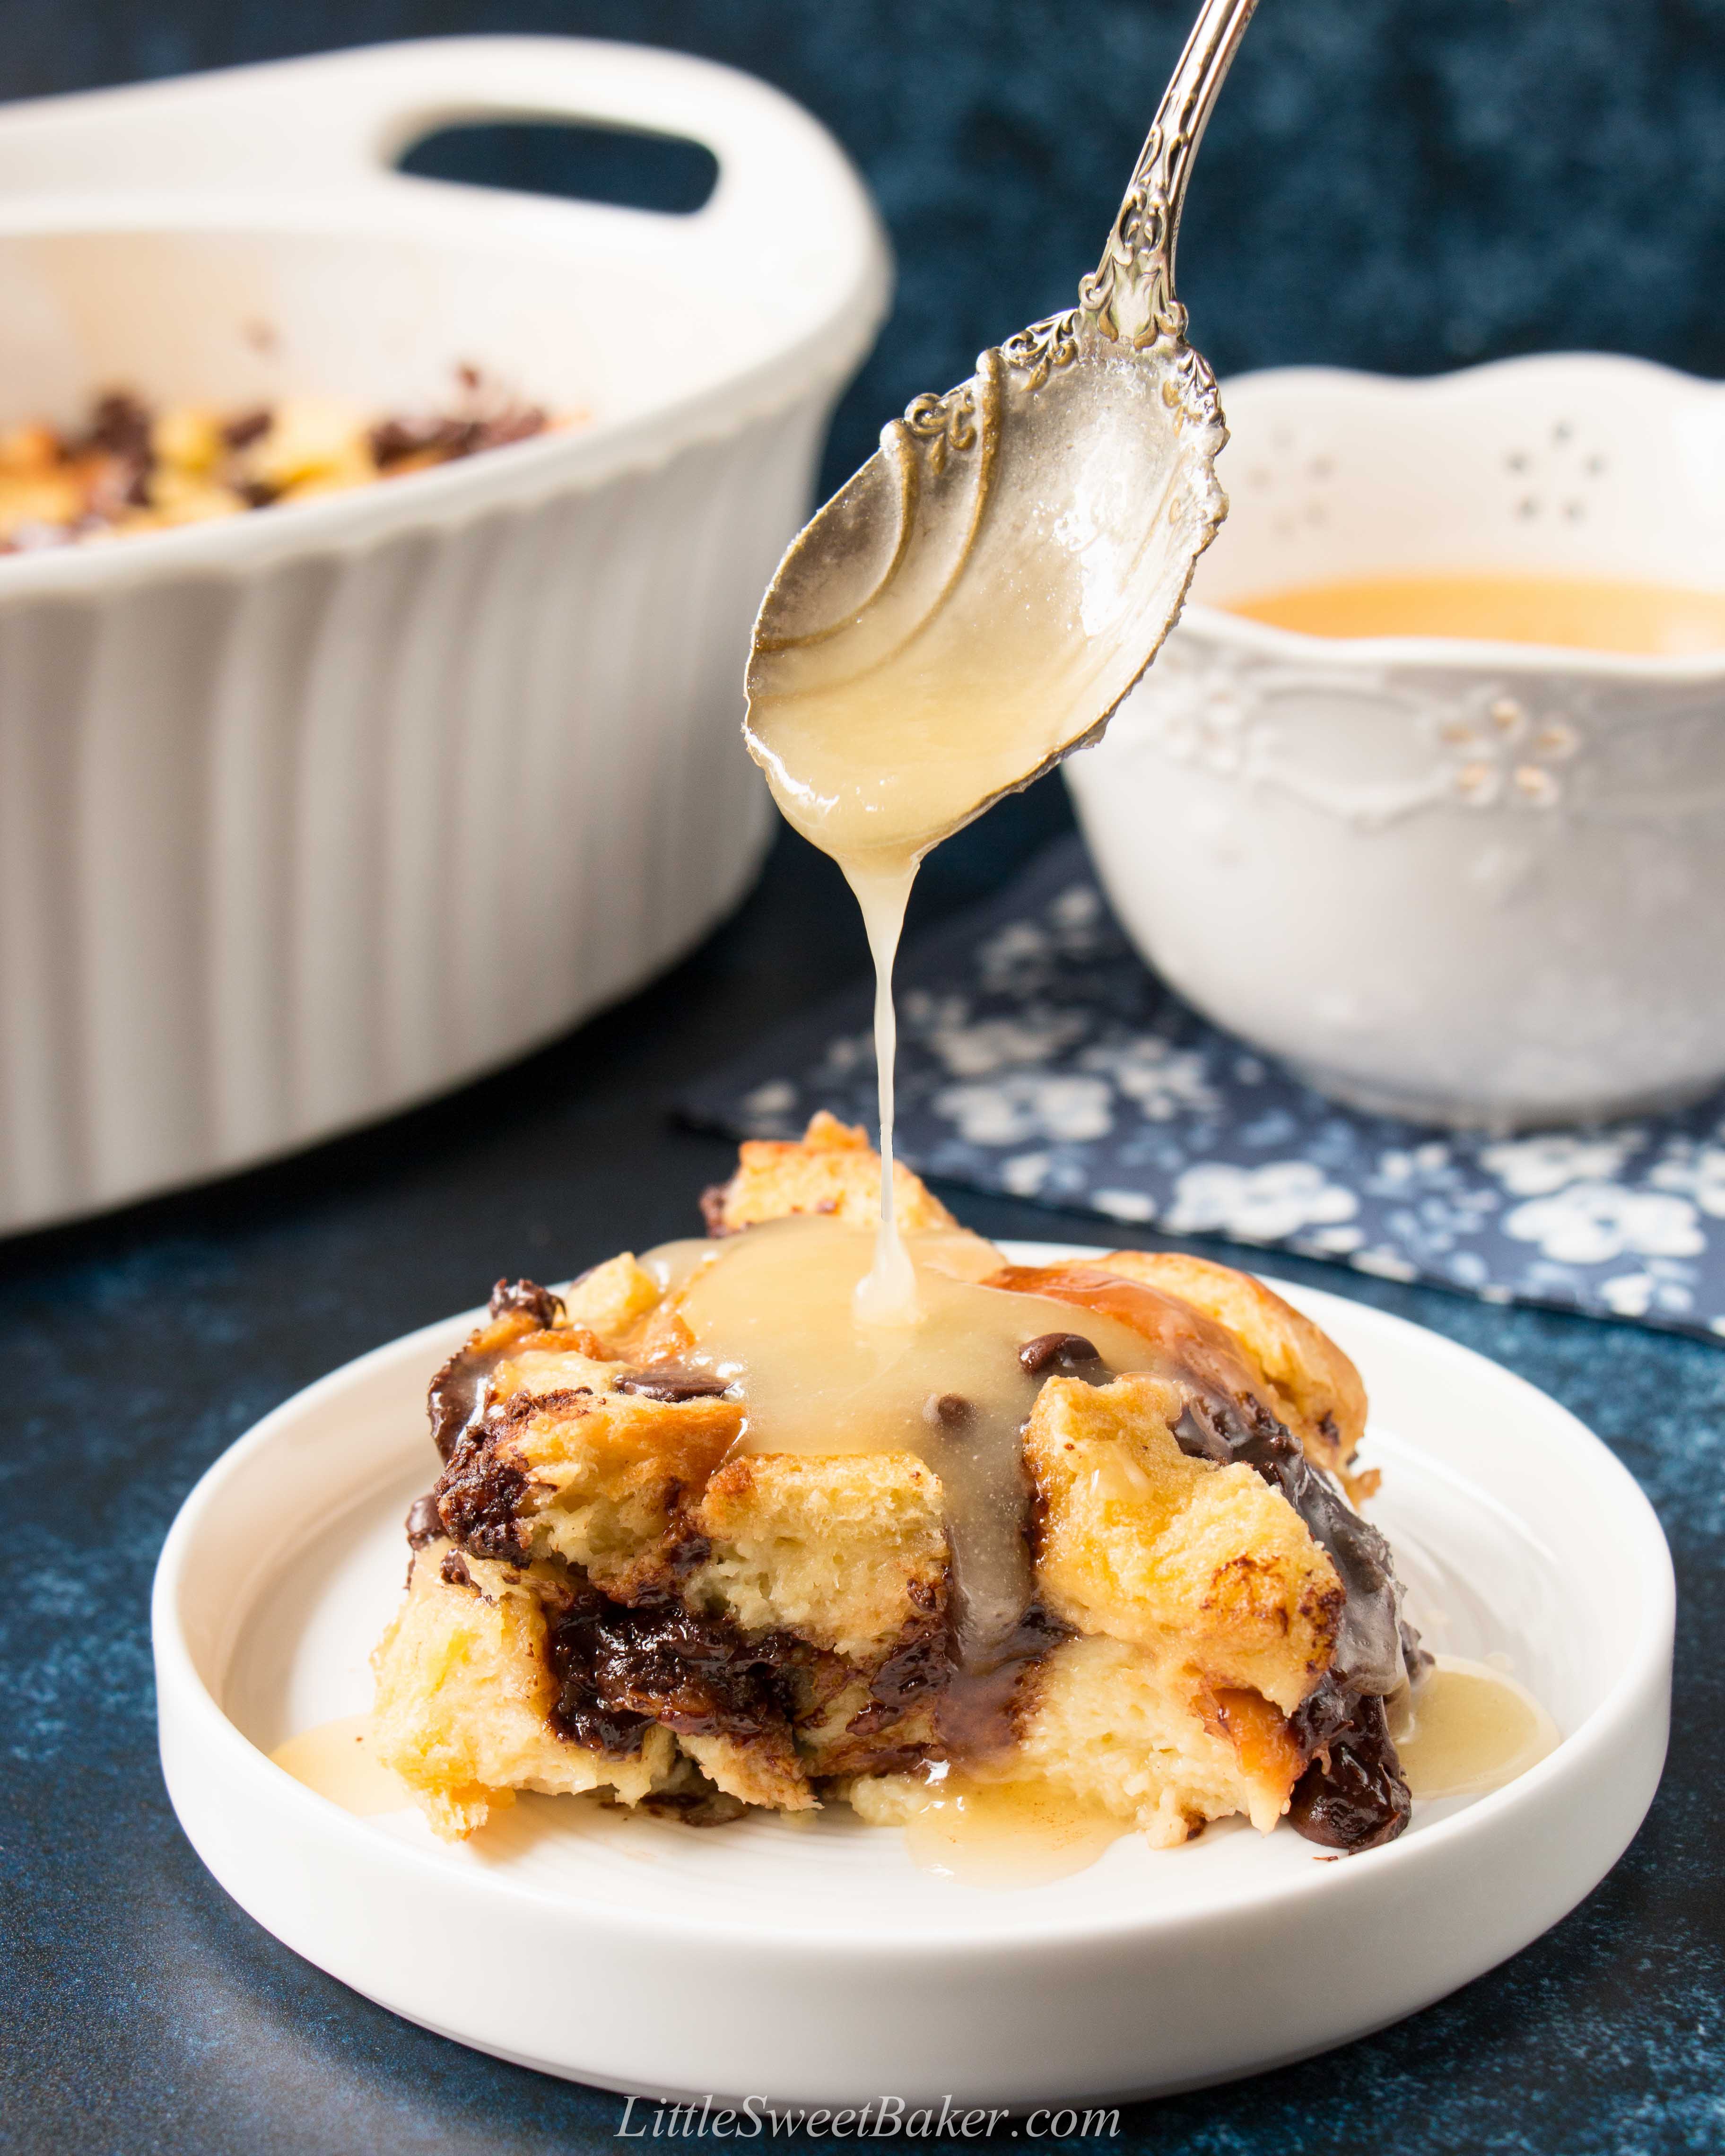 Bread Pudding with Bourbon Sauce (Recipe + Video) - Little Sweet Baker